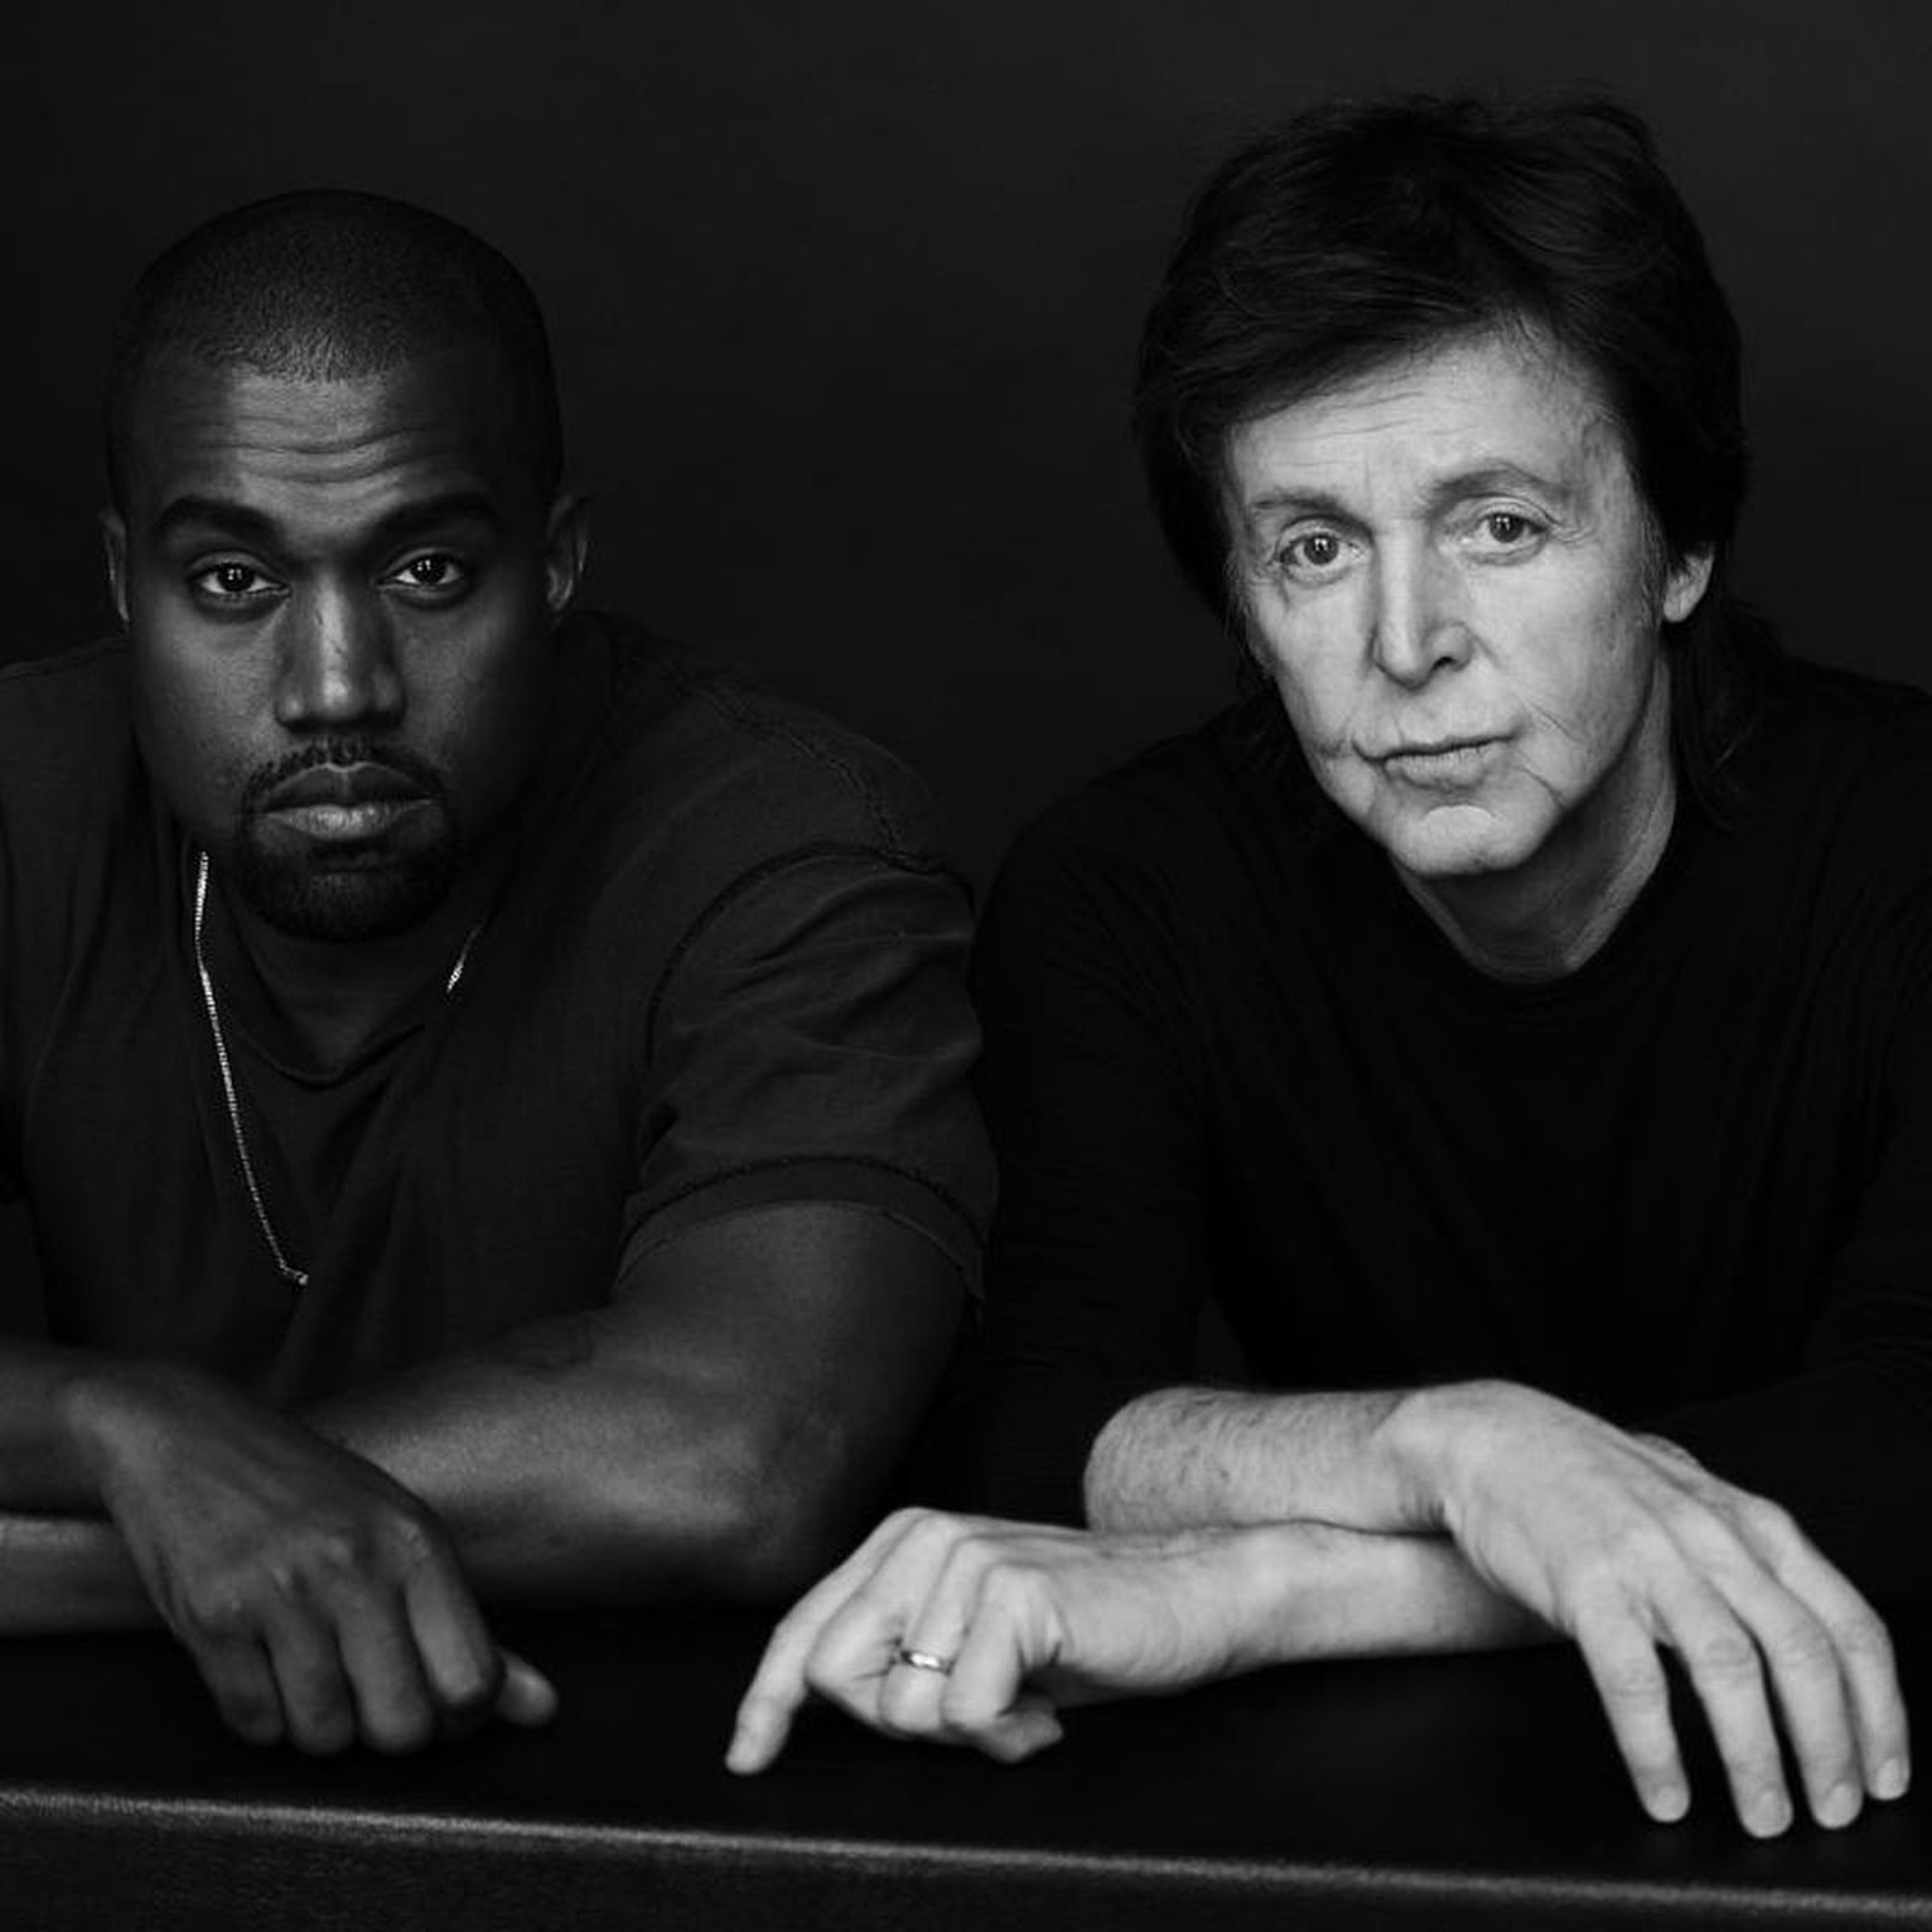 Photo of Paul and Kanye West taken in 2014 ahead of the release of 'Only One'